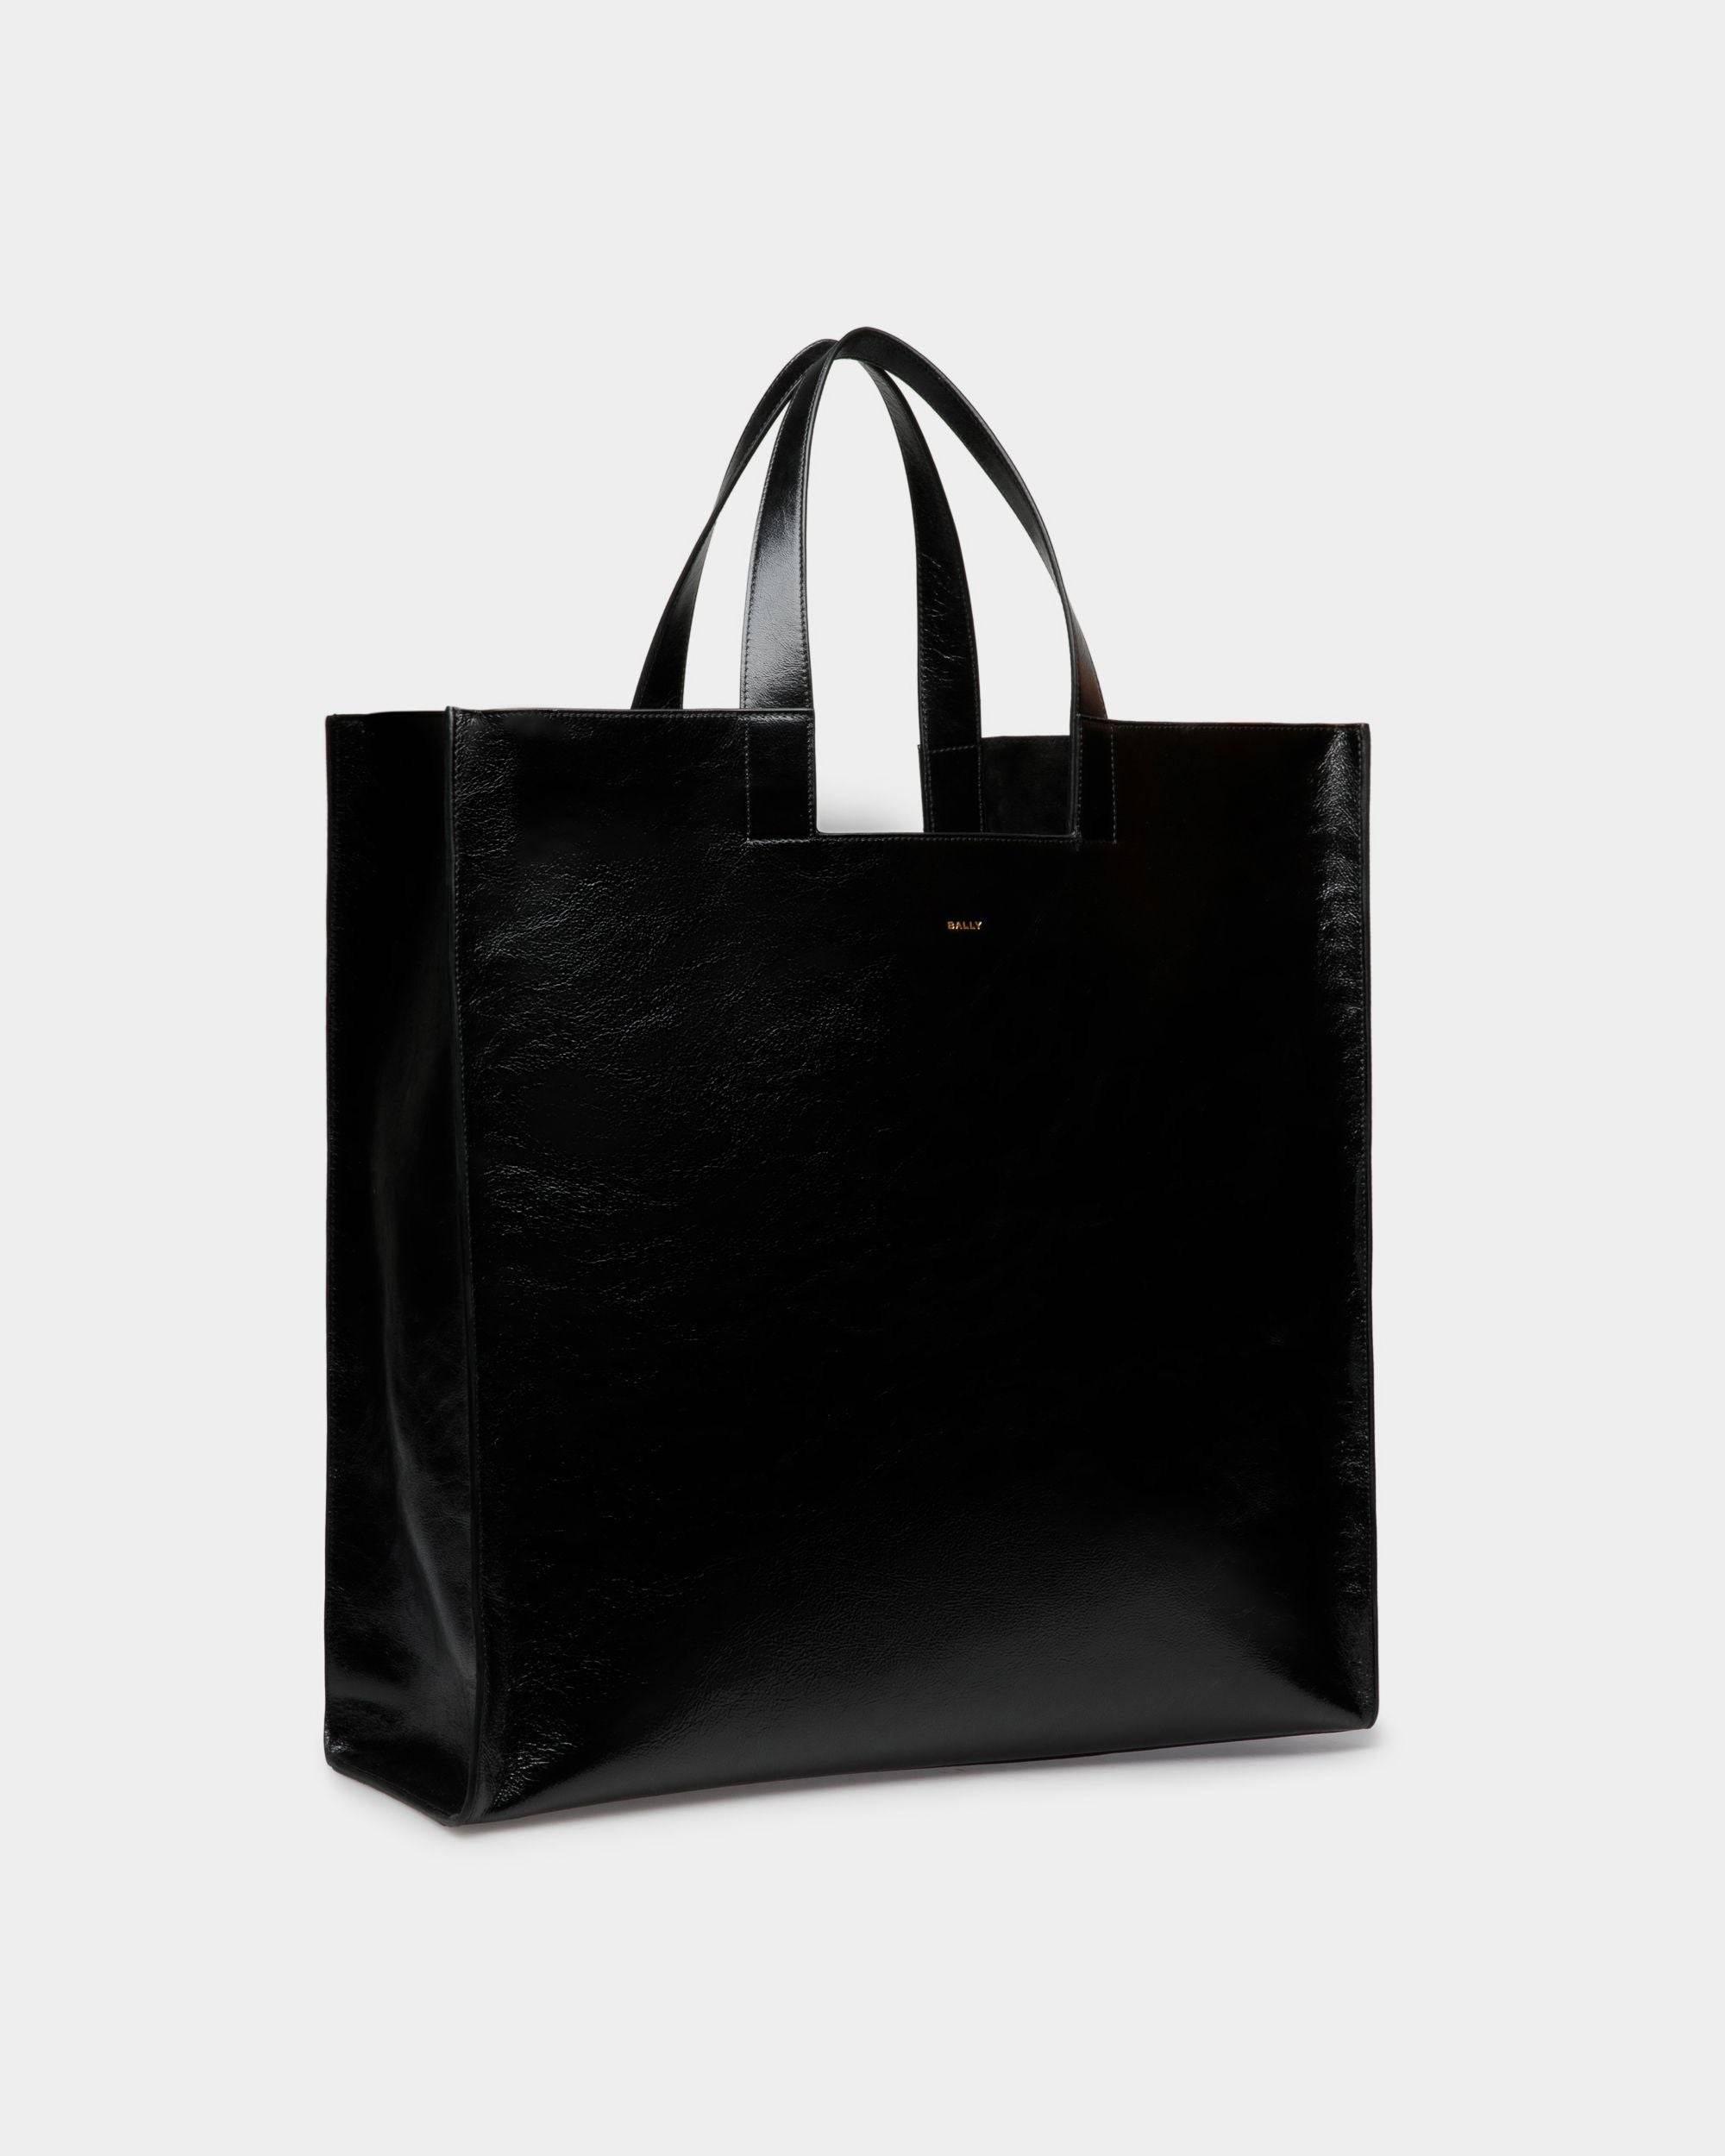 Easy Bally | Men's Tote in Black Leather | Bally | Still Life 3/4 Front